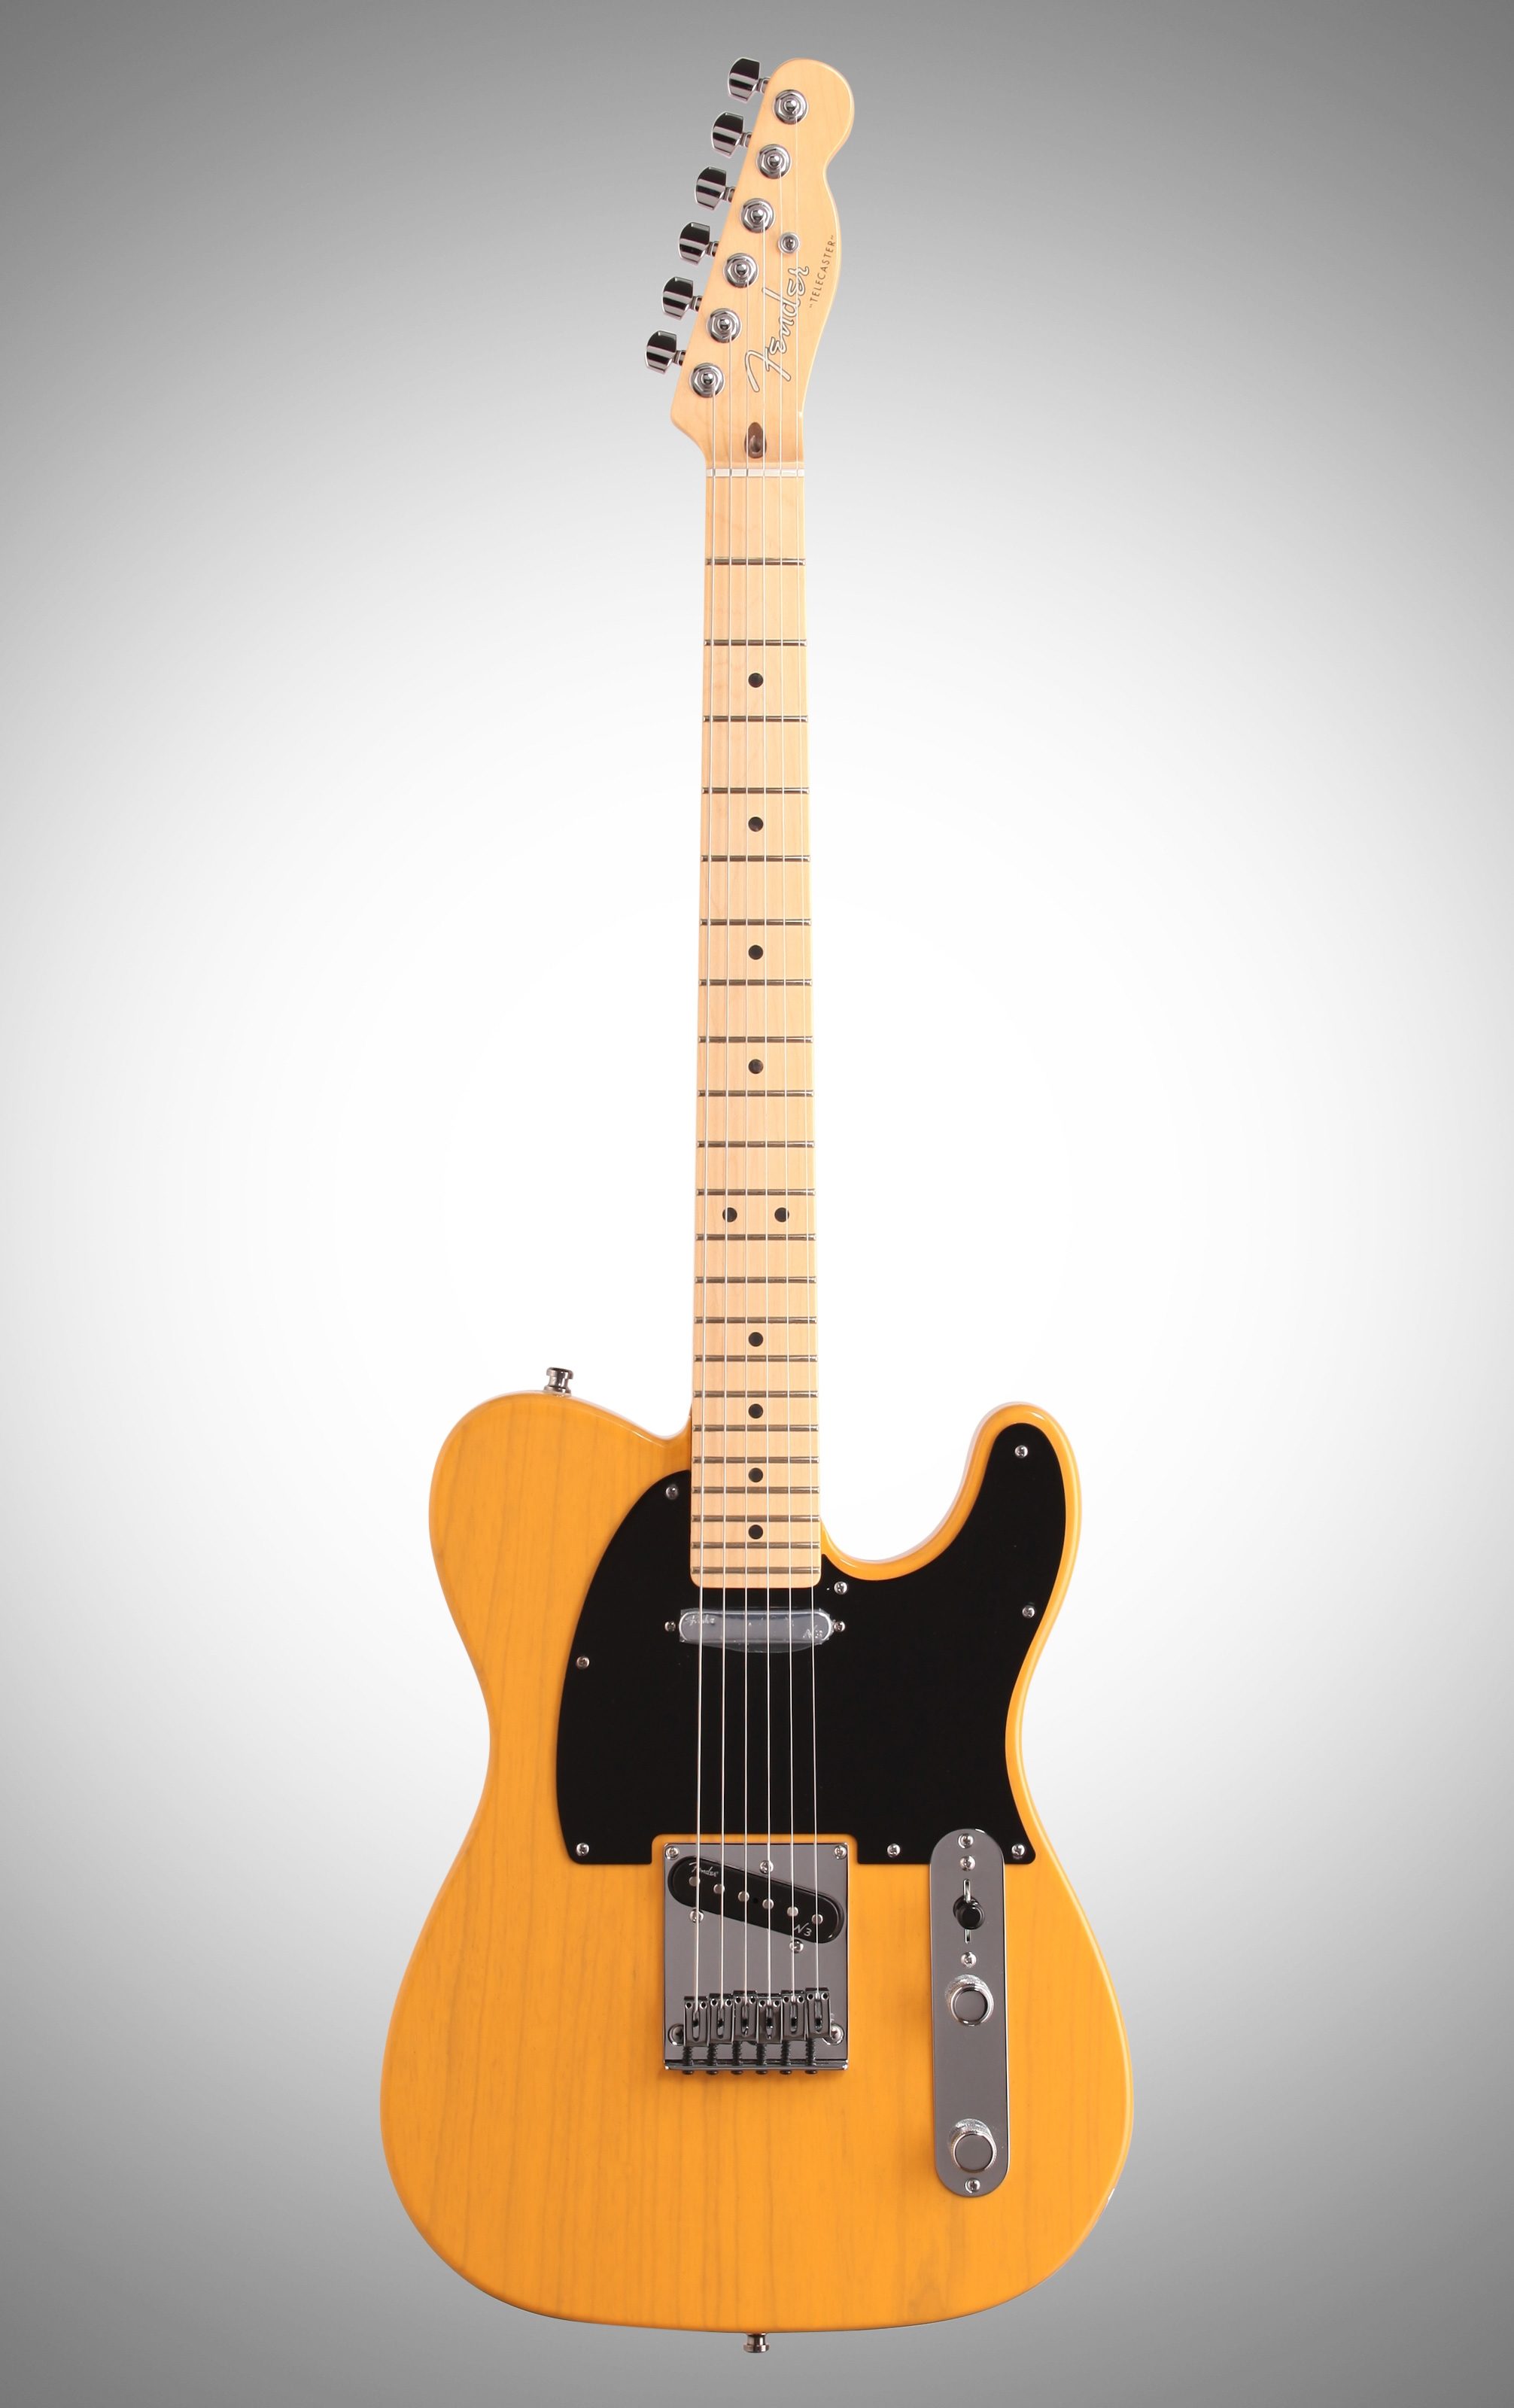 Fender American DLX Ash Telecaster Electric Guitar | zZounds